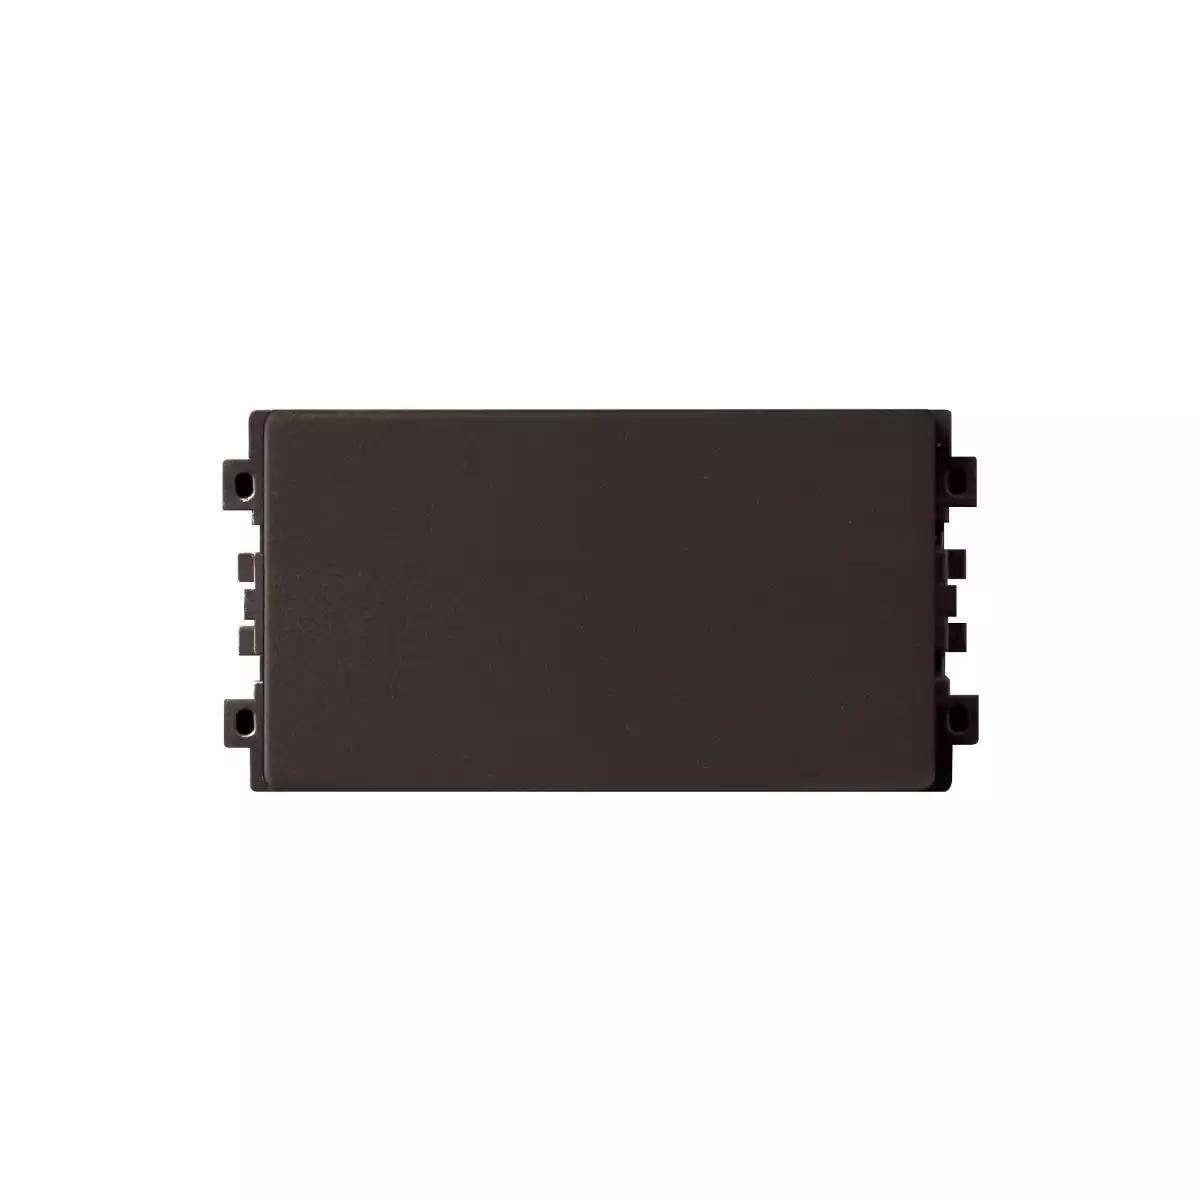 Blank Cover 1M Sized Module, Bronze